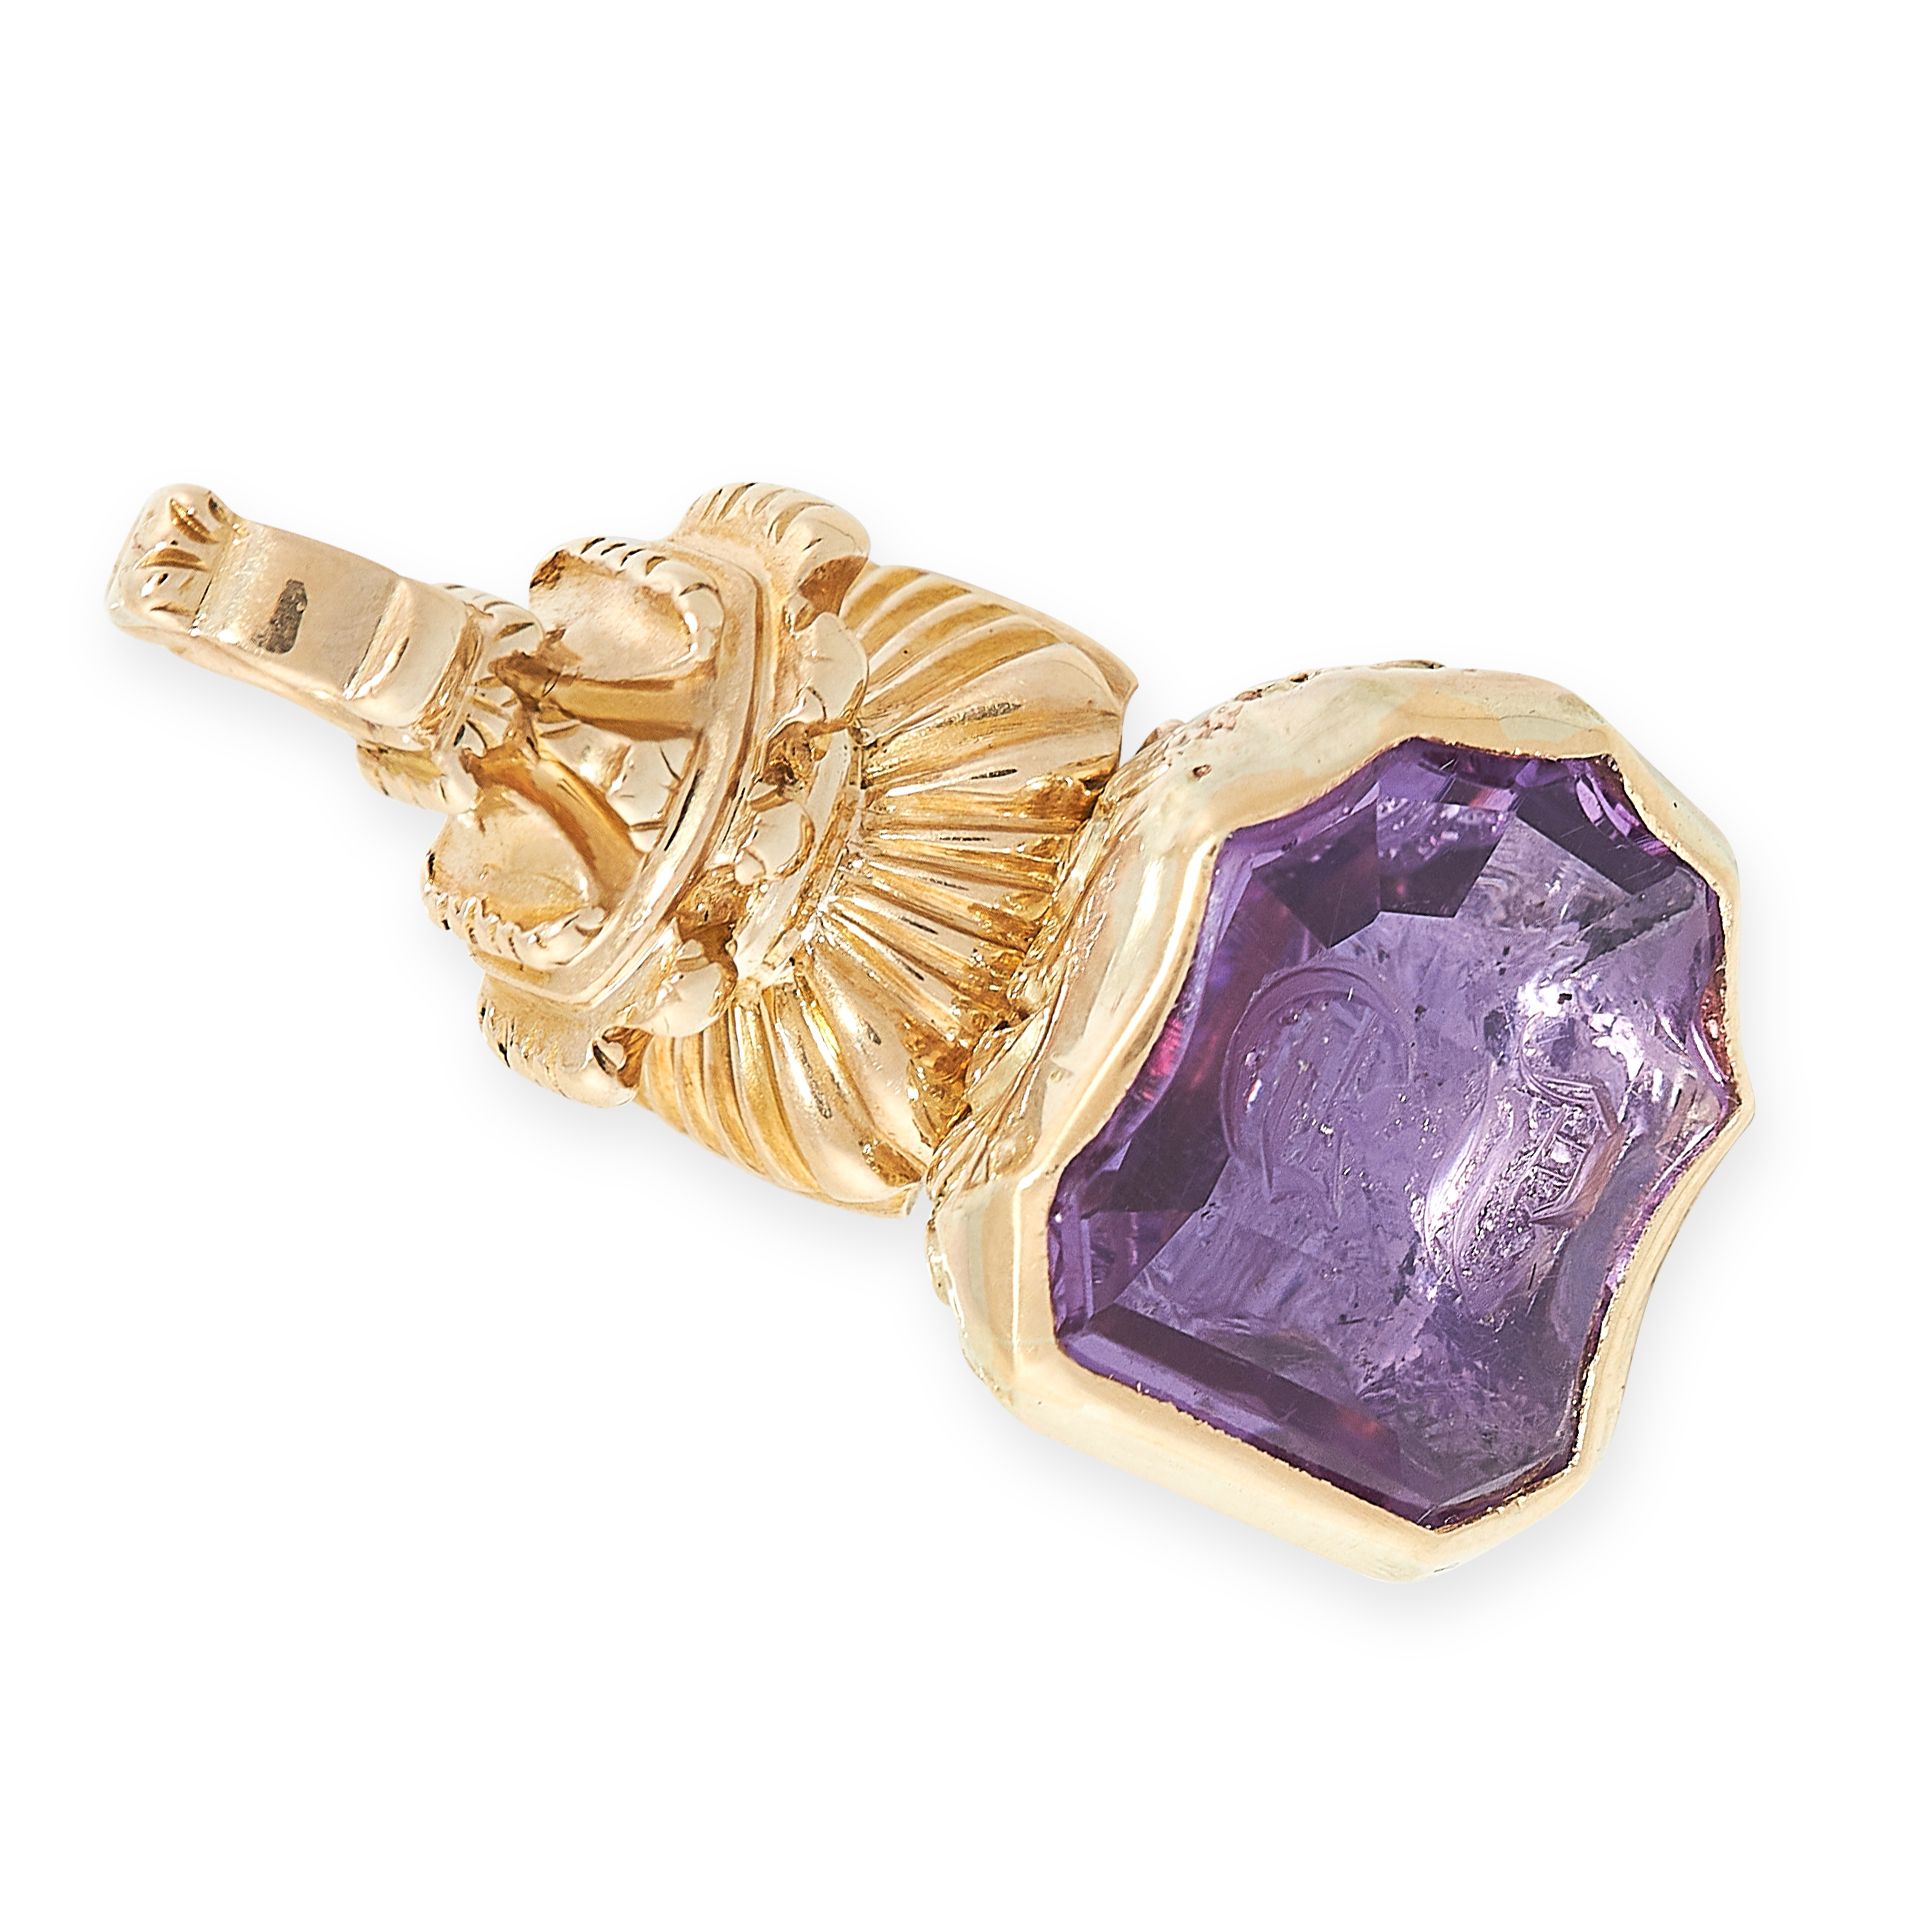 ANTIQUE AMETHYST FOB SEAL PENDANT / CHARM the face set with an amethyst reverse carved with - Image 2 of 3